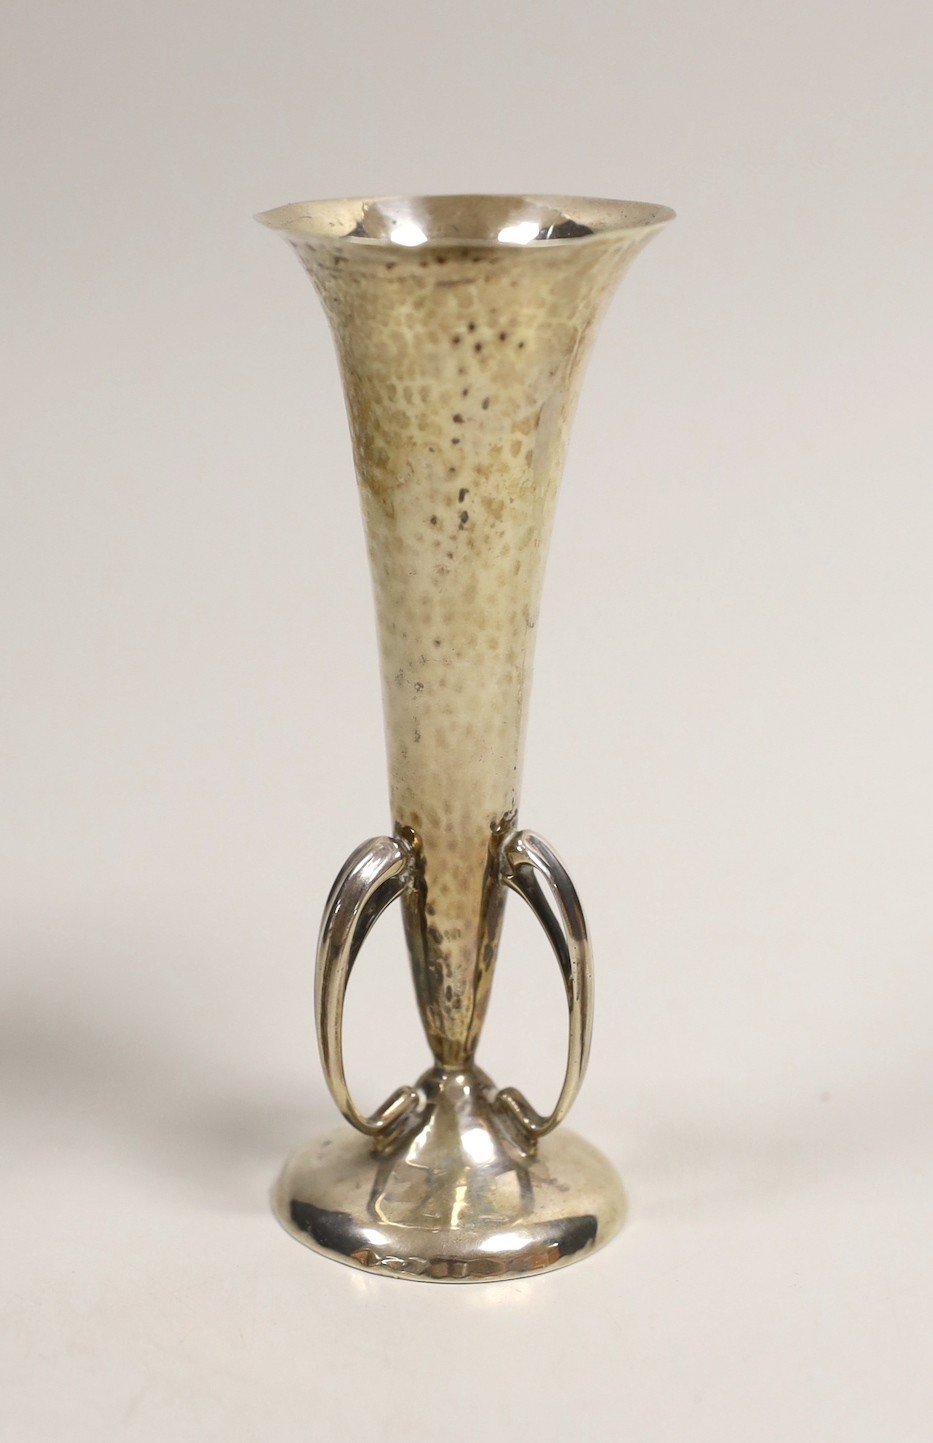 An Edwardian Art and Nouveau planished silver posy vase by Goldsmiths and Silversmiths Co. Ltd, 12.7cm, weighted.